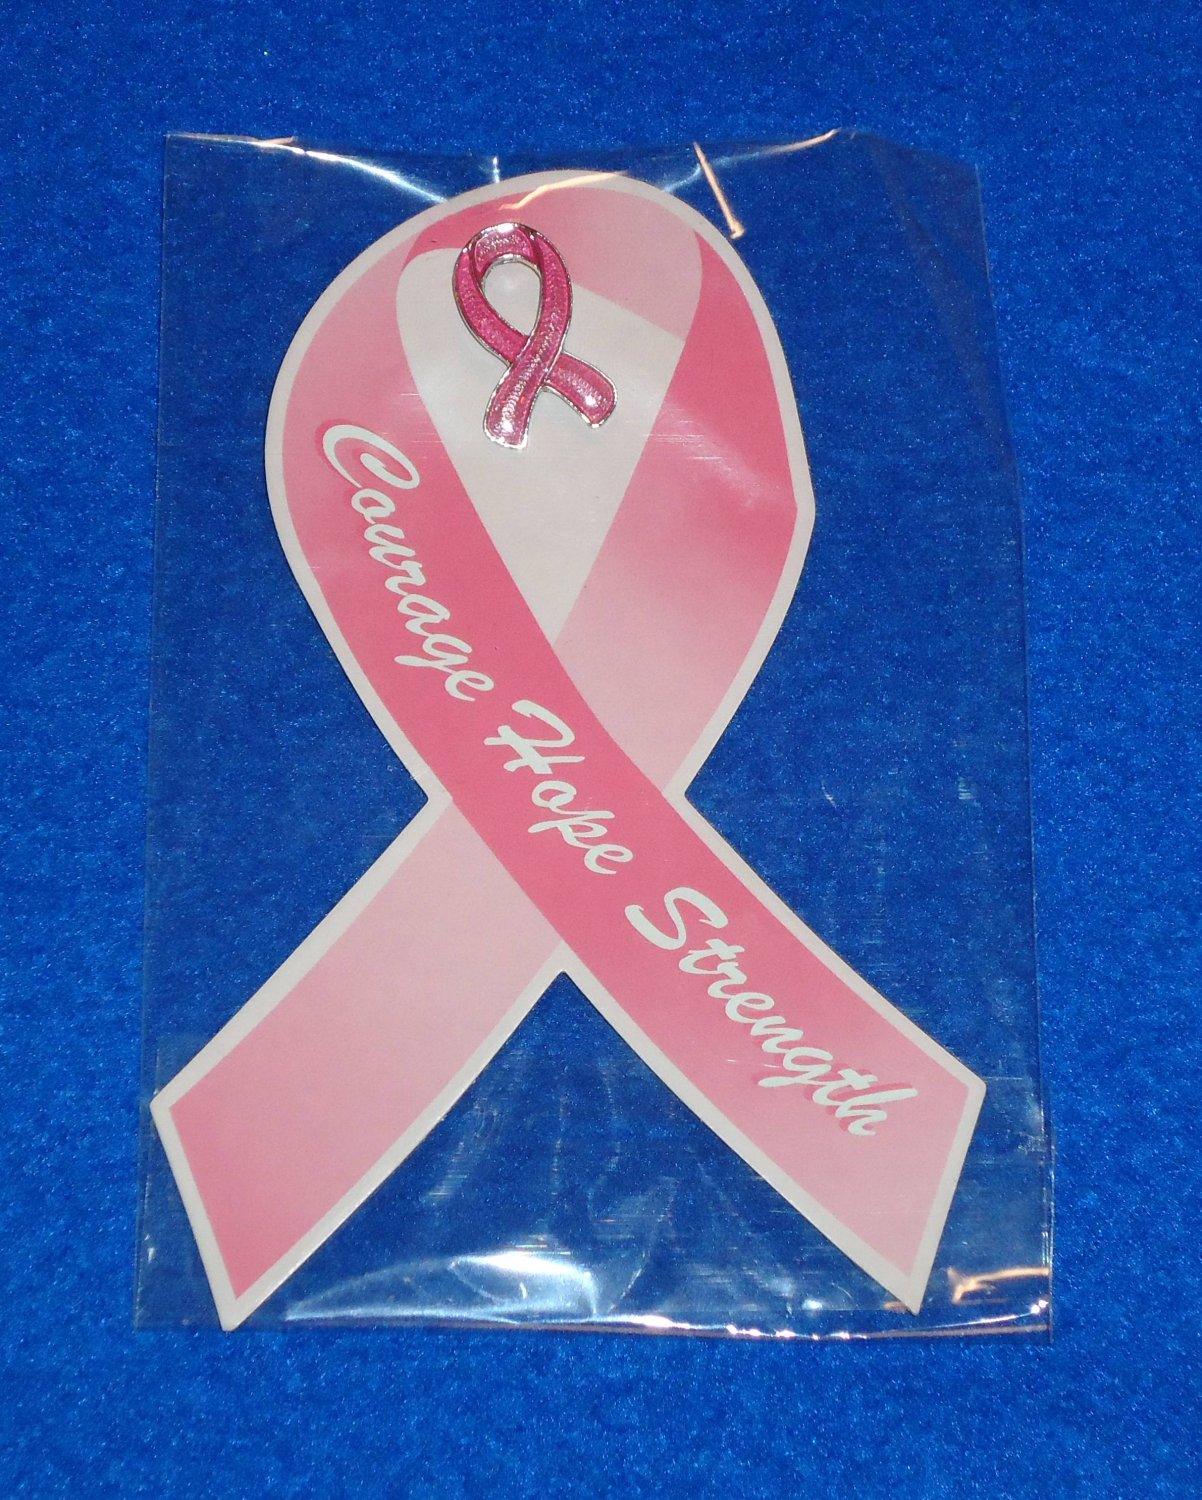 *BRAND NEW* BREAST CANCER PIN THINK PINK COURAGE HOPE STRENGTH *FACTORY SEALED*